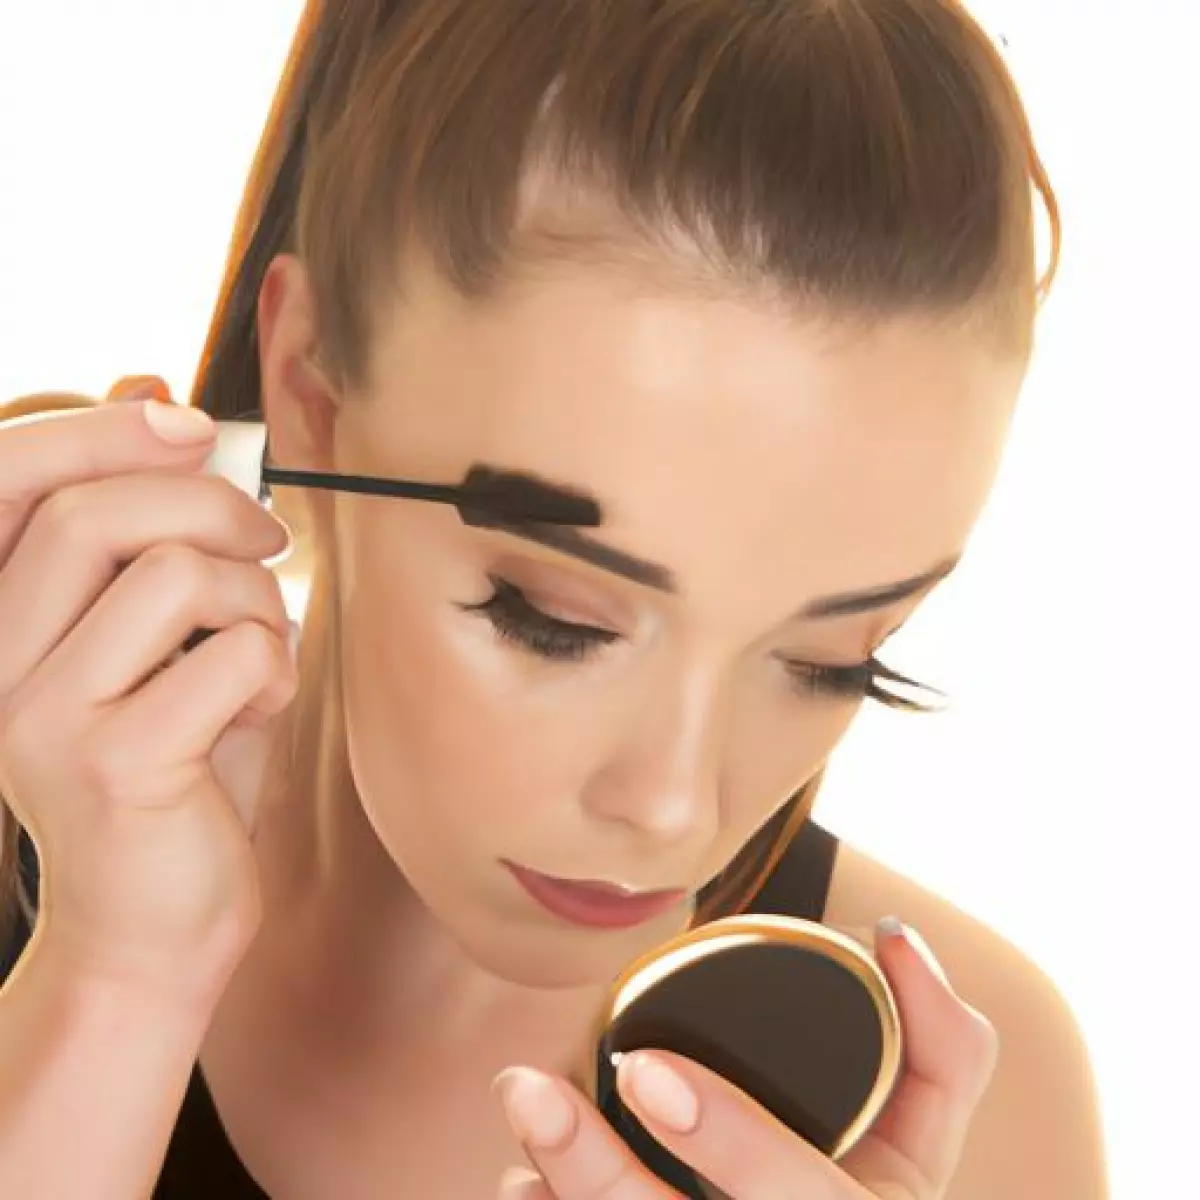 A woman applying mascara after the discontinuation of Clinique Naturally Glossy Mascara